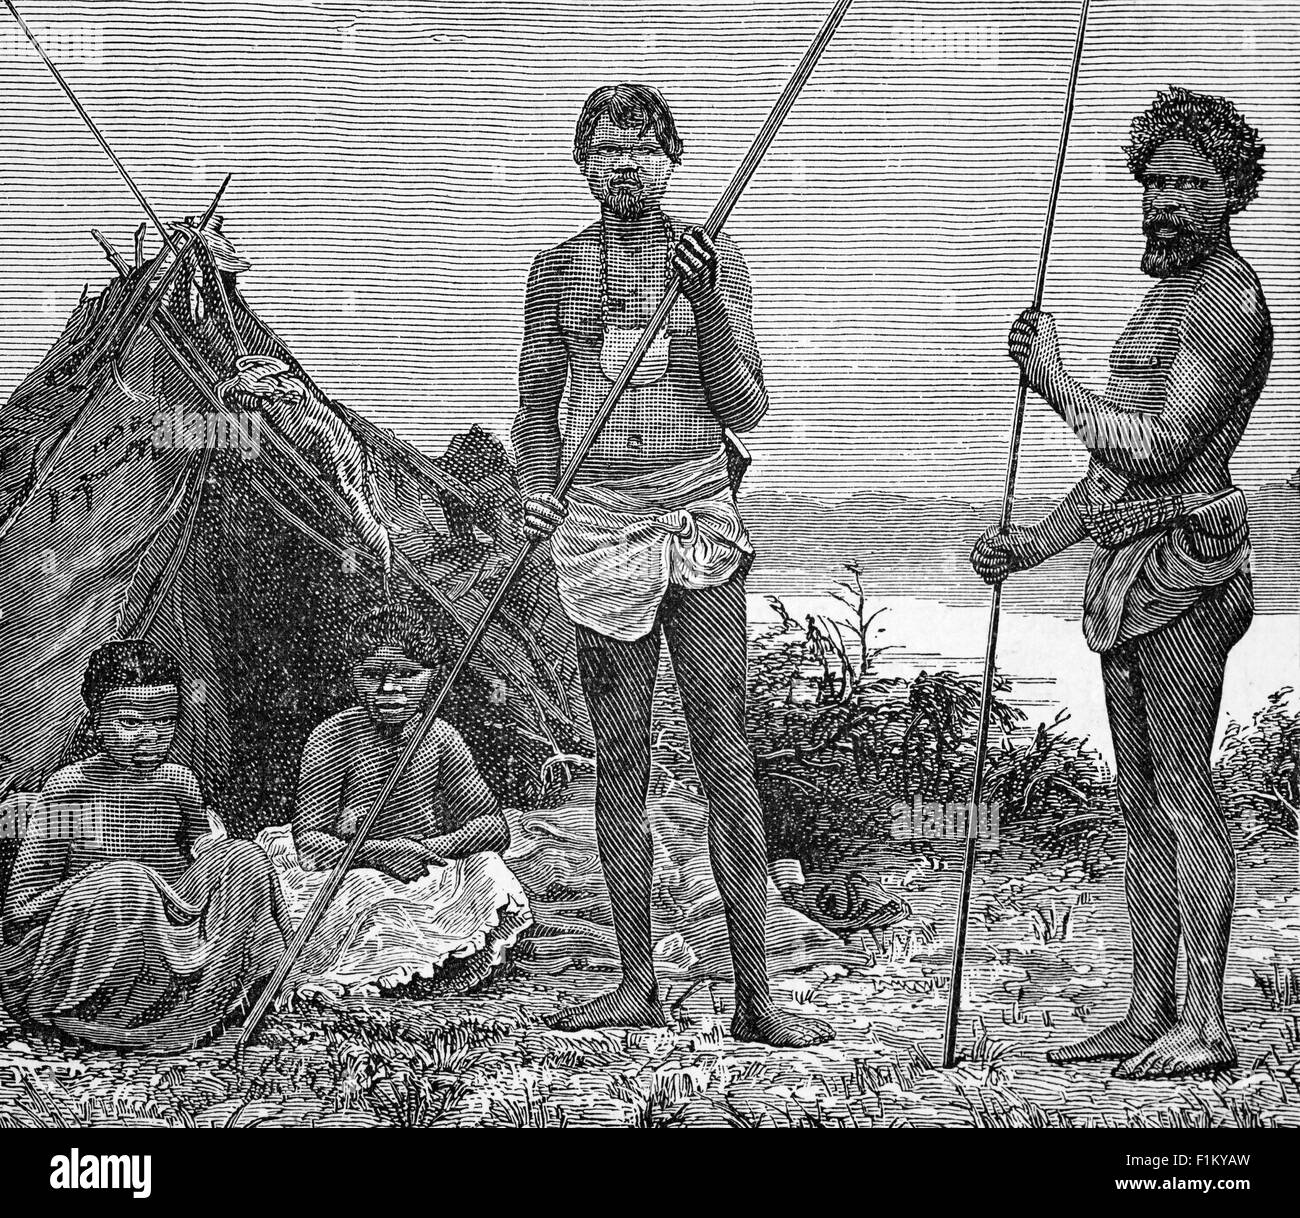 A 19th Century illustration of a native Aboriginal camp in Australia. Estimates of their numbers at the time that colonisation began in 1788 vary from 300,000 to a million and they were estimated to have lived in Australia over 65,000 years prior to British colonisation.The regions of heaviest Aboriginal population were the same temperate coastal regions that are currently the most heavily populated. Stock Photo